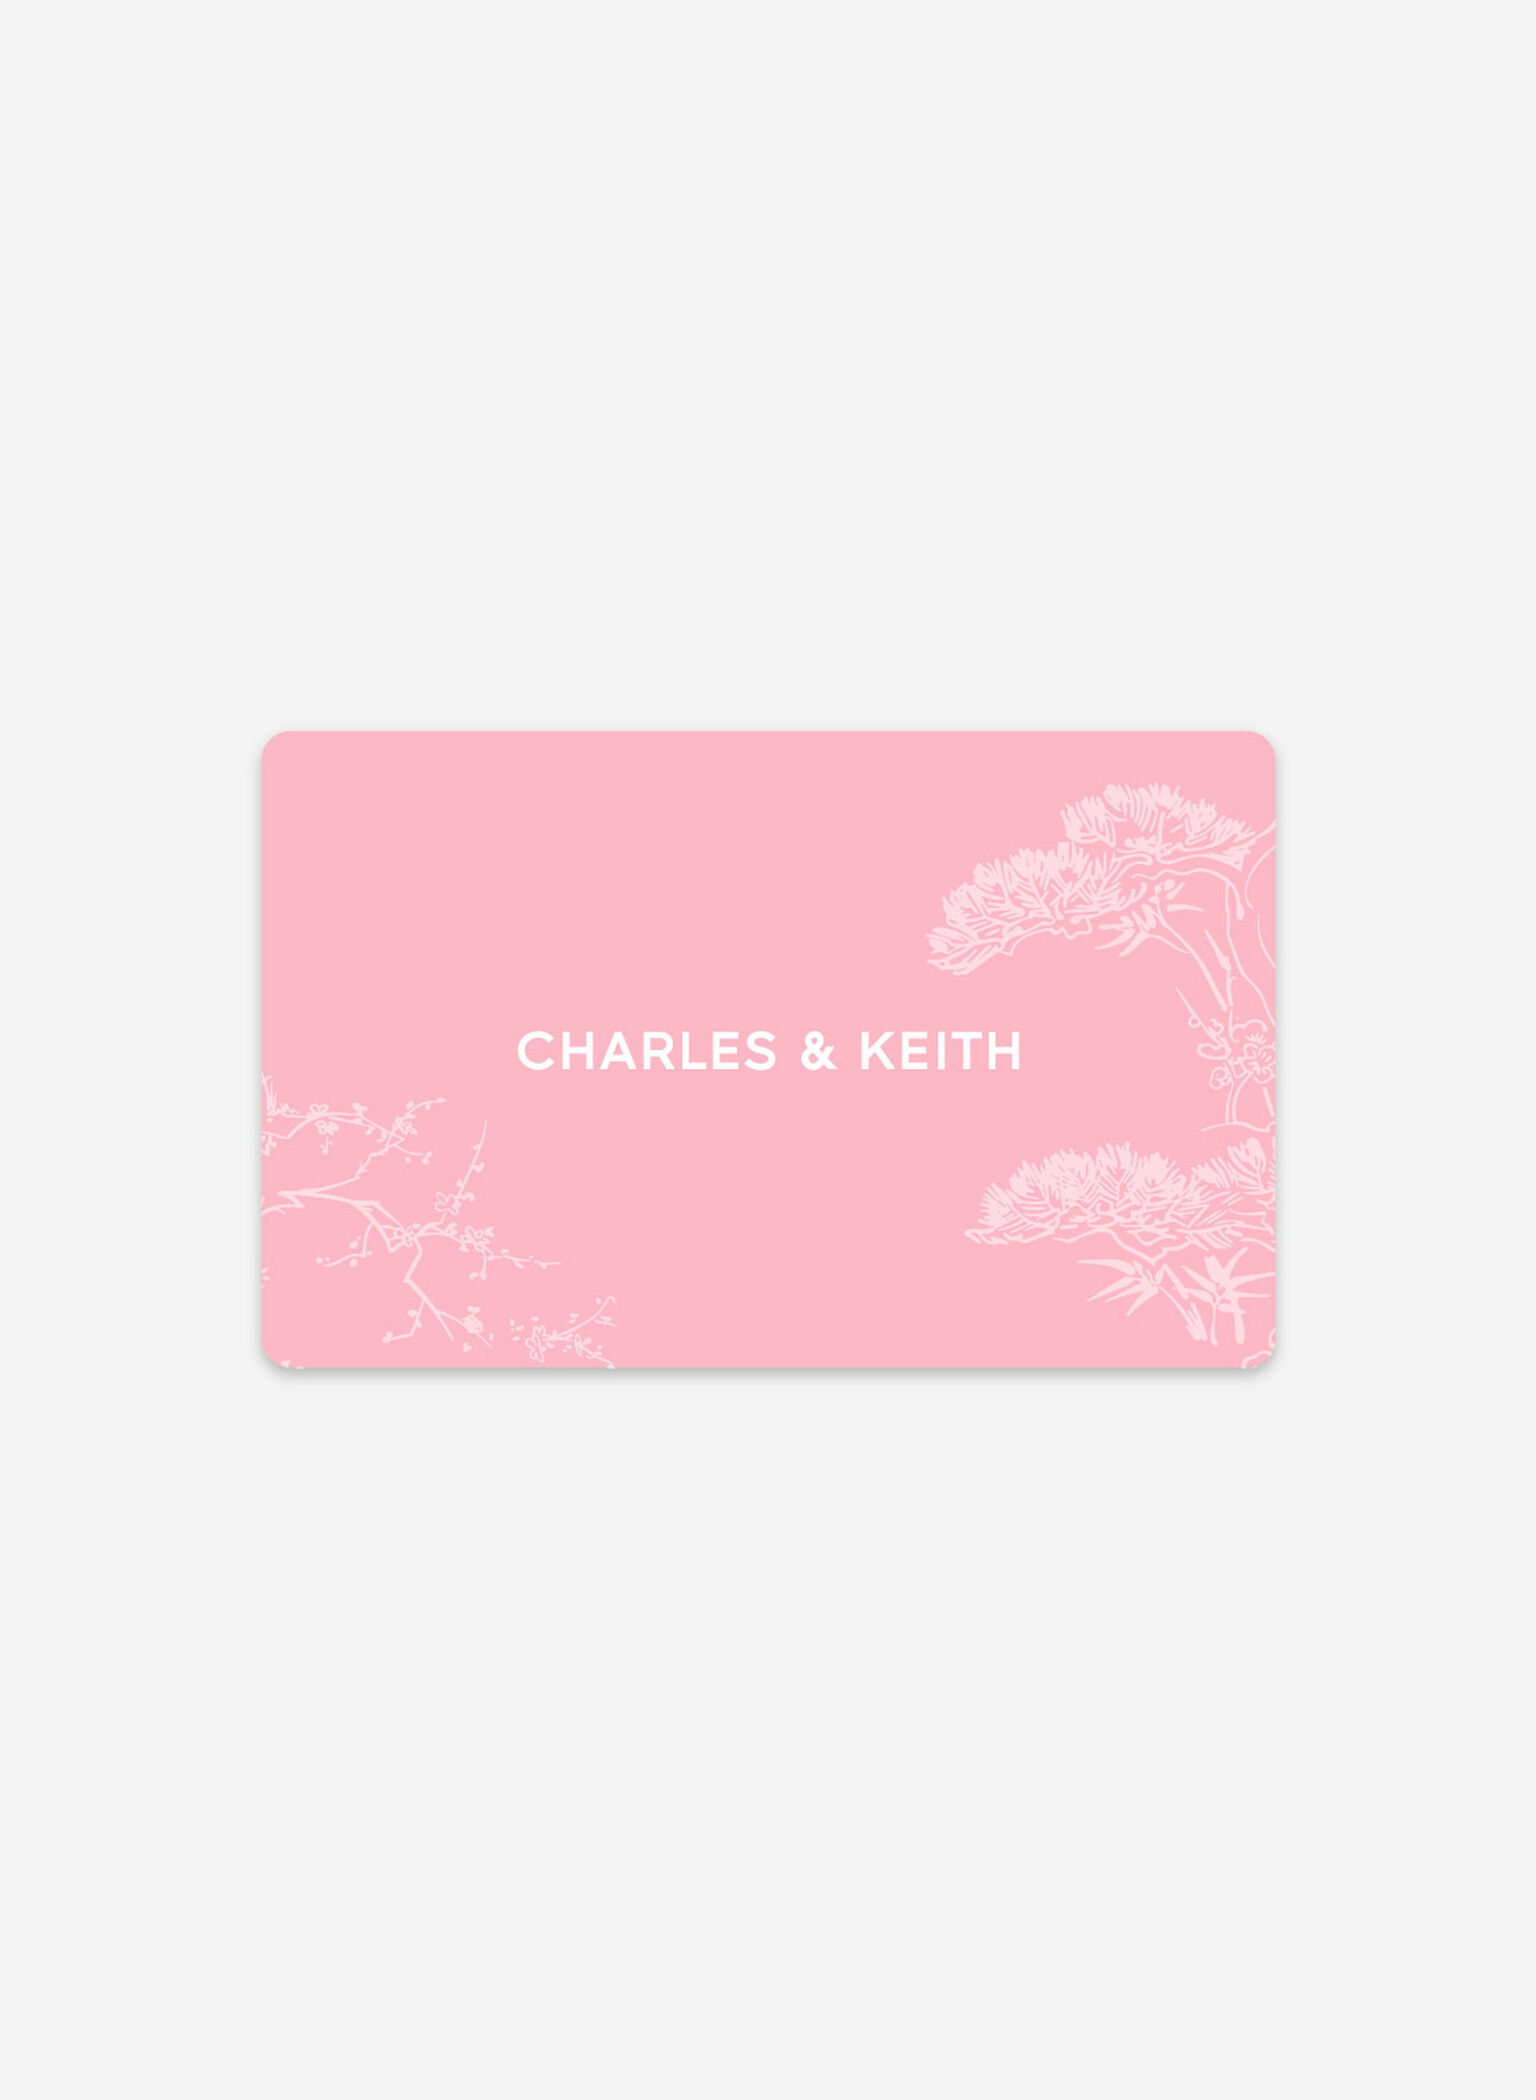 Lunar New Year Gift Card - Pink & White, Pink, giftratio3_4